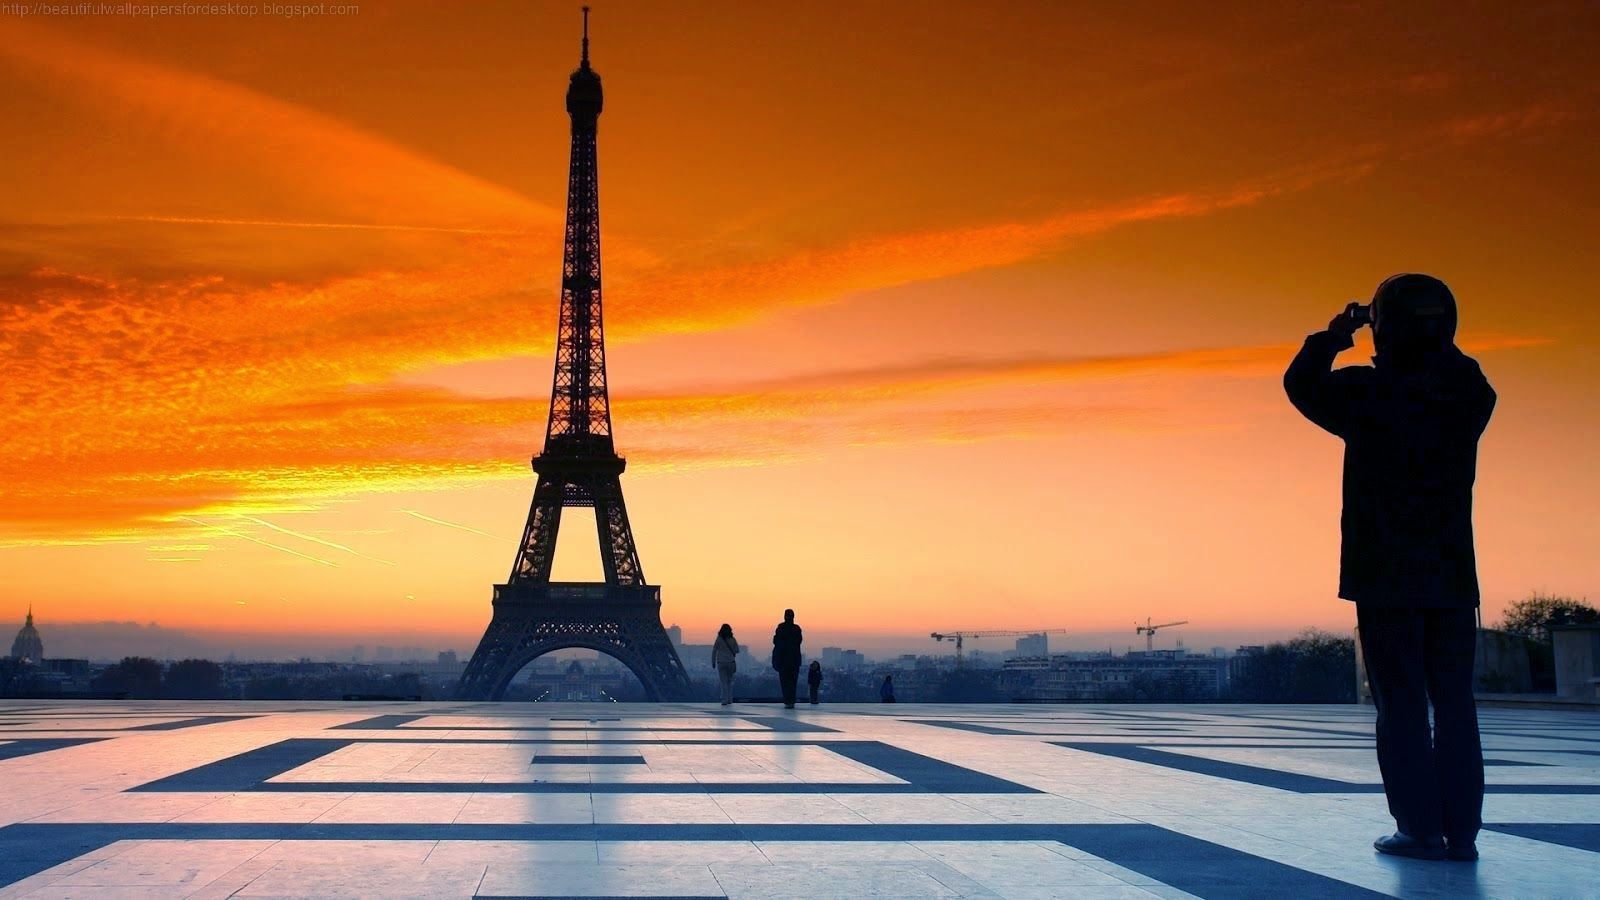 Amazing Eiffel Tower At Evening Time Wallpapers | Eiffel Tower ...